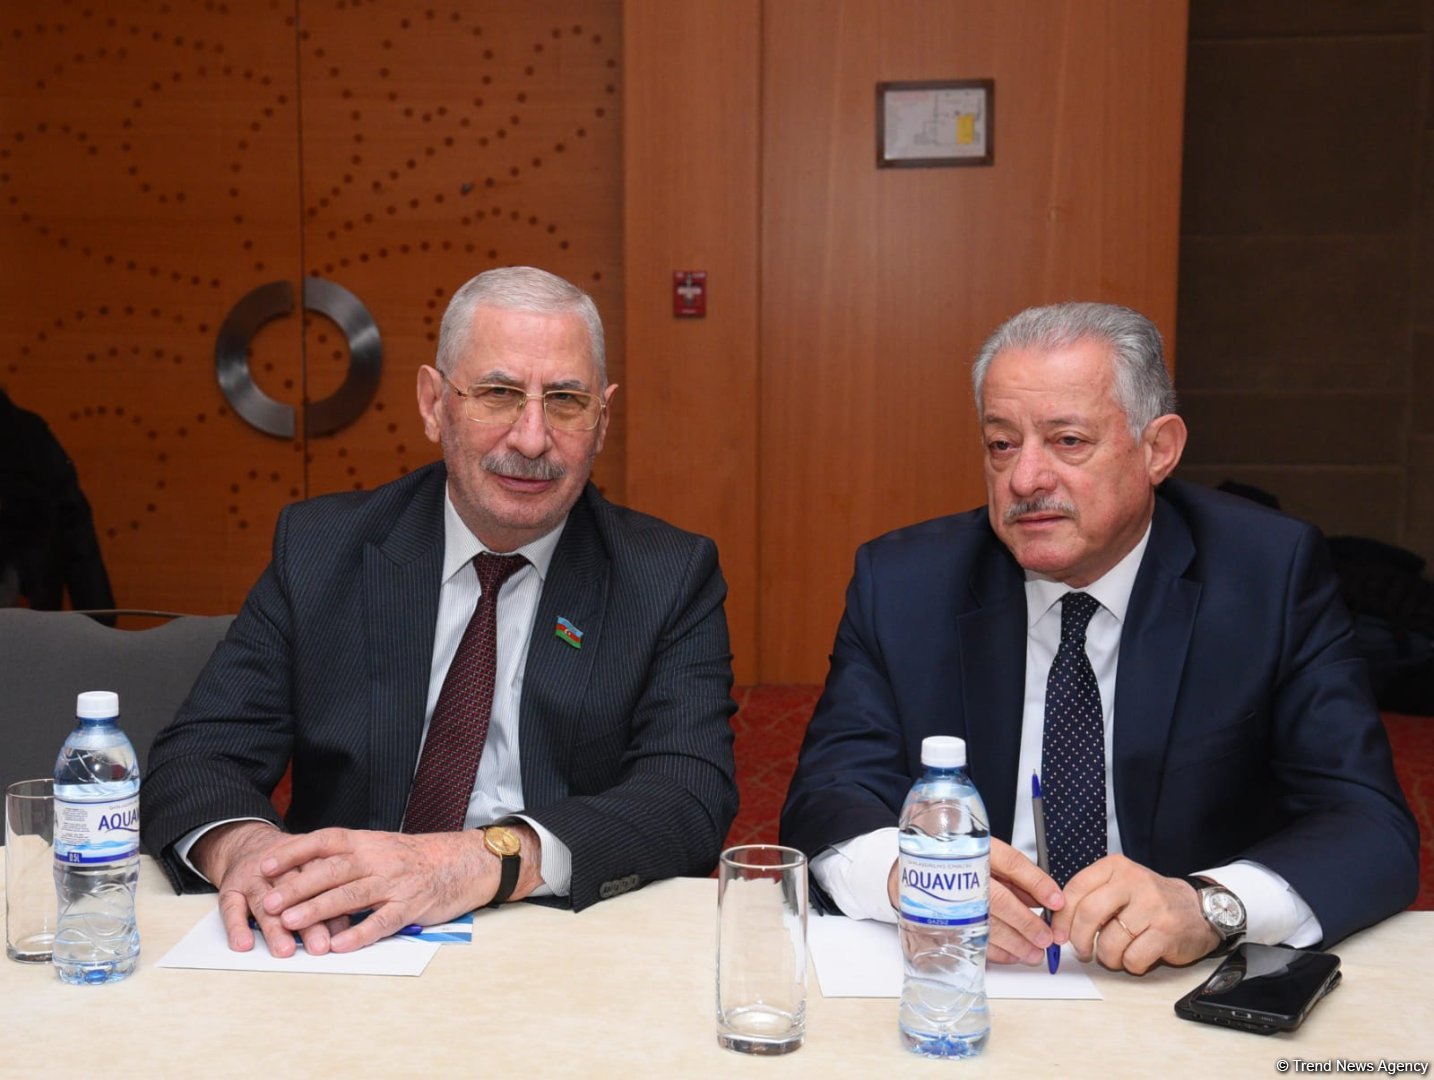 Meeting on equal campaigning options in Azerbaijan's presidential election held (PHOTO)